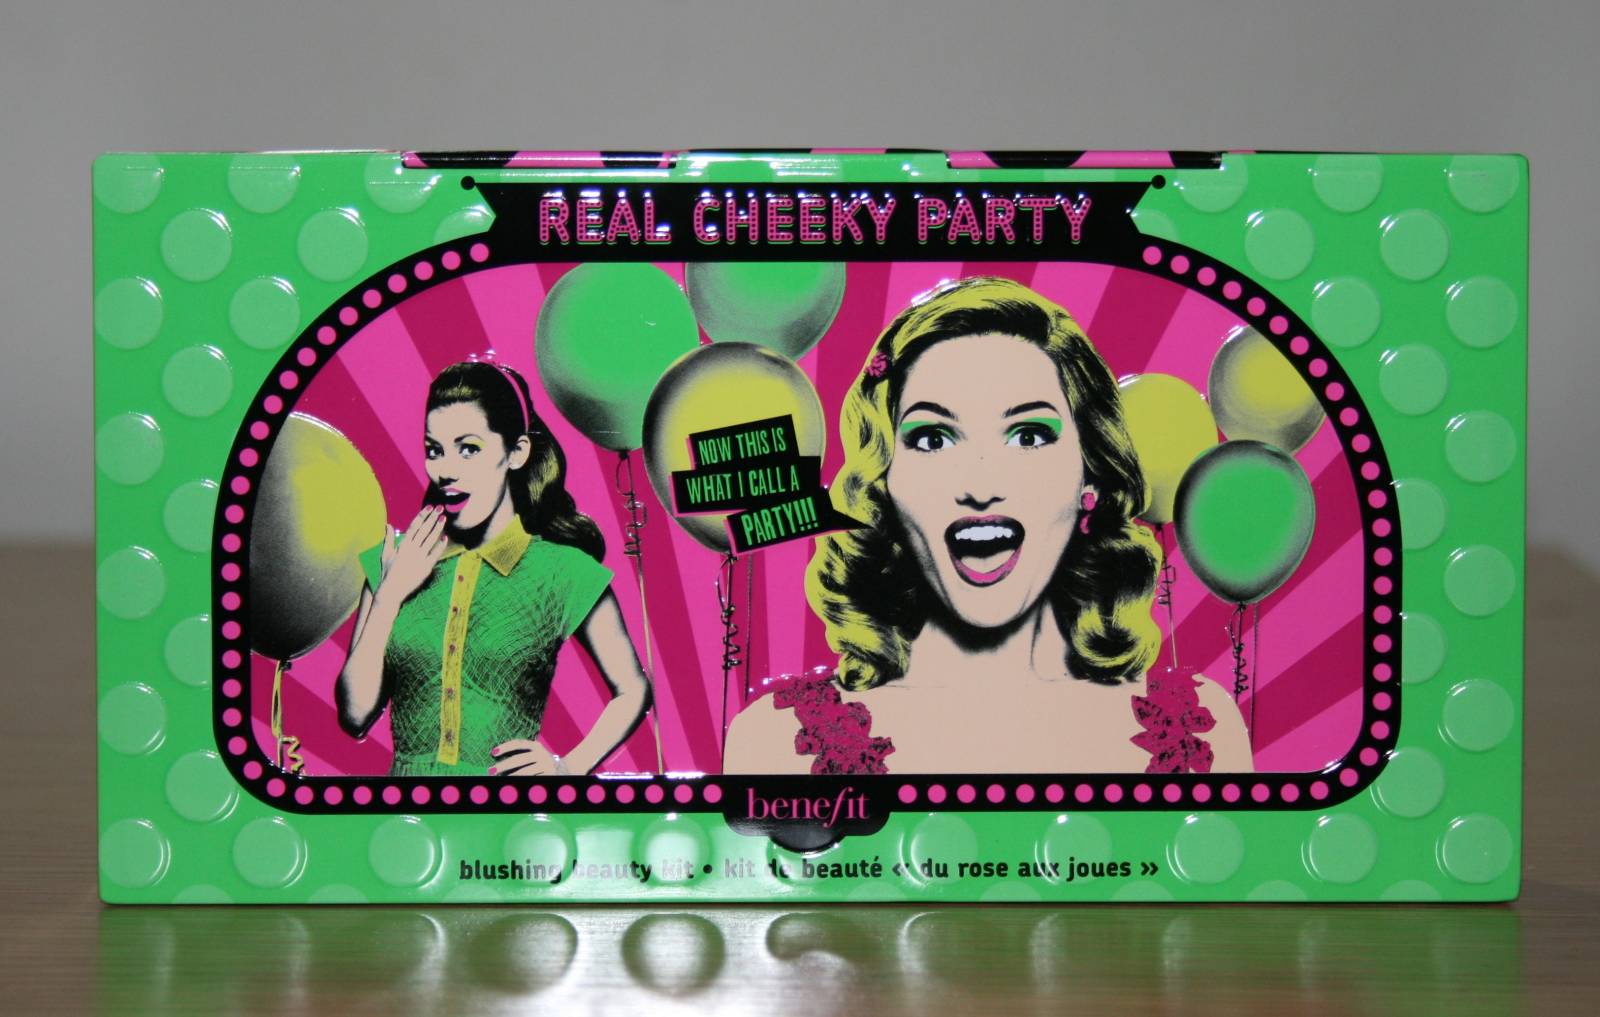 12 Gifts of Christmas 2015: Benefit Real Cheeky Party Set